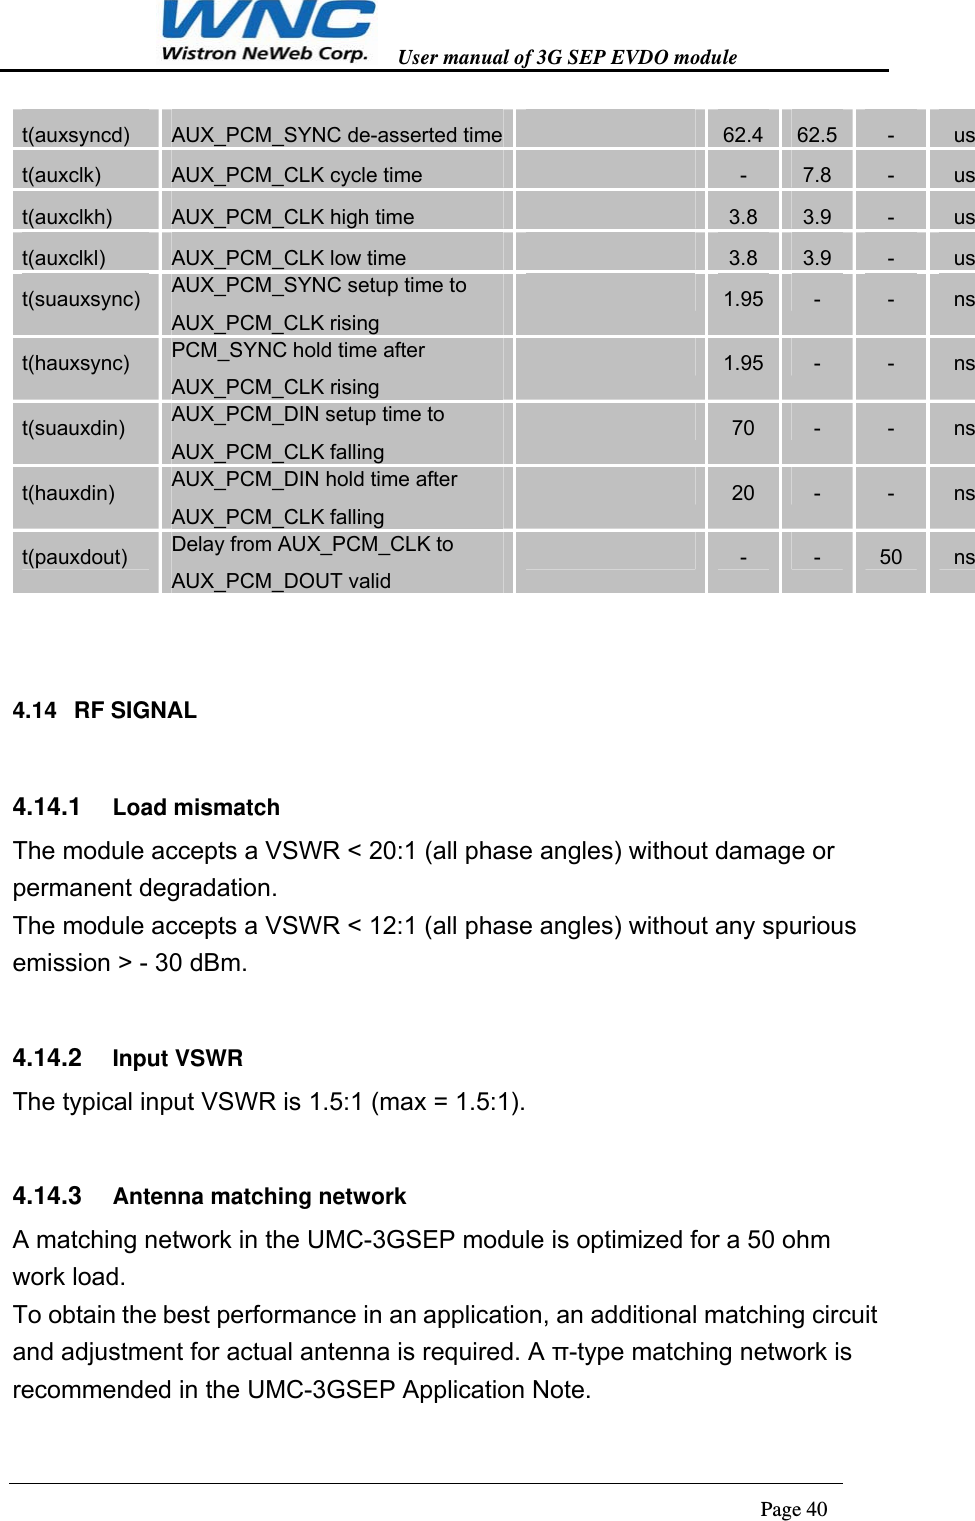   User manual of 3G SEP EVDO module                                                                      Page 40  t(auxsyncd)  AUX_PCM_SYNC de-asserted time  62.4  62.5  -  us t(auxclk)  AUX_PCM_CLK cycle time   -  7.8  -  us t(auxclkh)  AUX_PCM_CLK high time   3.8  3.9  -  us t(auxclkl)  AUX_PCM_CLK low time   3.8  3.9  -  us t(suauxsync)  AUX_PCM_SYNC setup time to AUX_PCM_CLK rising  1.95  -  -  ns t(hauxsync)  PCM_SYNC hold time after AUX_PCM_CLK rising 1.95  -  -  ns t(suauxdin)  AUX_PCM_DIN setup time to AUX_PCM_CLK falling  70  -  -  ns t(hauxdin)  AUX_PCM_DIN hold time after AUX_PCM_CLK falling  20  -  -  ns t(pauxdout)  Delay from AUX_PCM_CLK to AUX_PCM_DOUT valid  -  -  50  ns  4.14   RF SIGNAL   4.14.1  Load mismatch The module accepts a VSWR &lt; 20:1 (all phase angles) without damage or permanent degradation. The module accepts a VSWR &lt; 12:1 (all phase angles) without any spurious emission &gt; - 30 dBm. 4.14.2  Input VSWR The typical input VSWR is 1.5:1 (max = 1.5:1). 4.14.3  Antenna matching network A matching network in the UMC-3GSEP module is optimized for a 50 ohm work load. To obtain the best performance in an application, an additional matching circuit and adjustment for actual antenna is required. A π-type matching network is recommended in the UMC-3GSEP Application Note. 